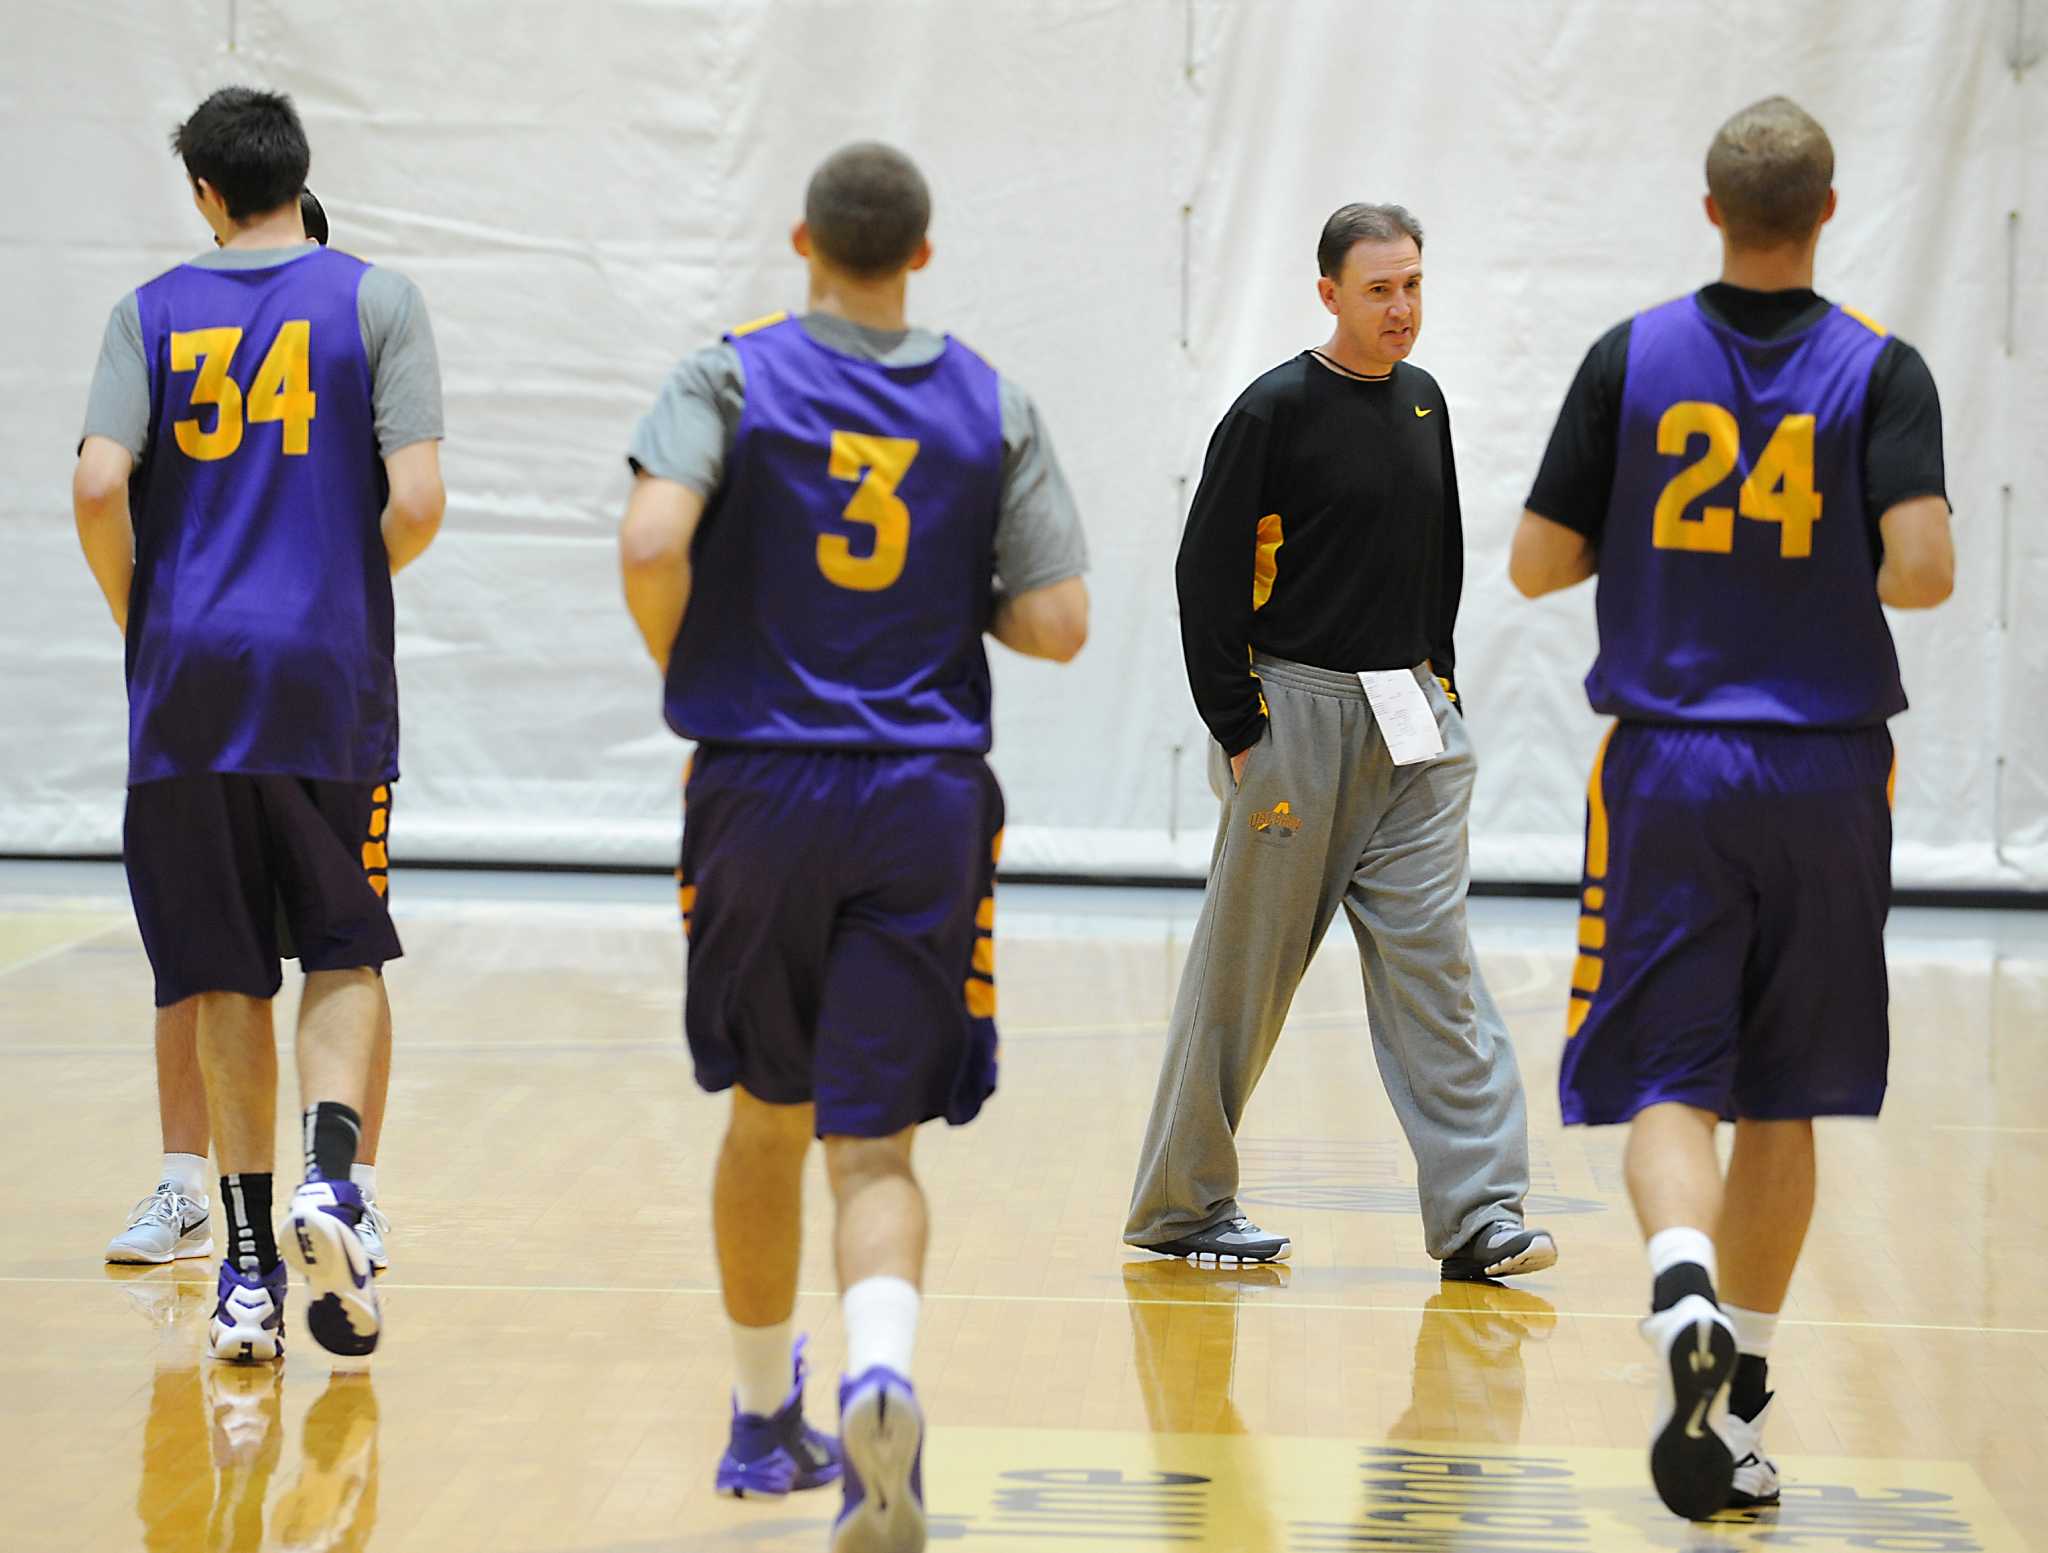 UAlbany basketball player Joe Cremo has new number with new team